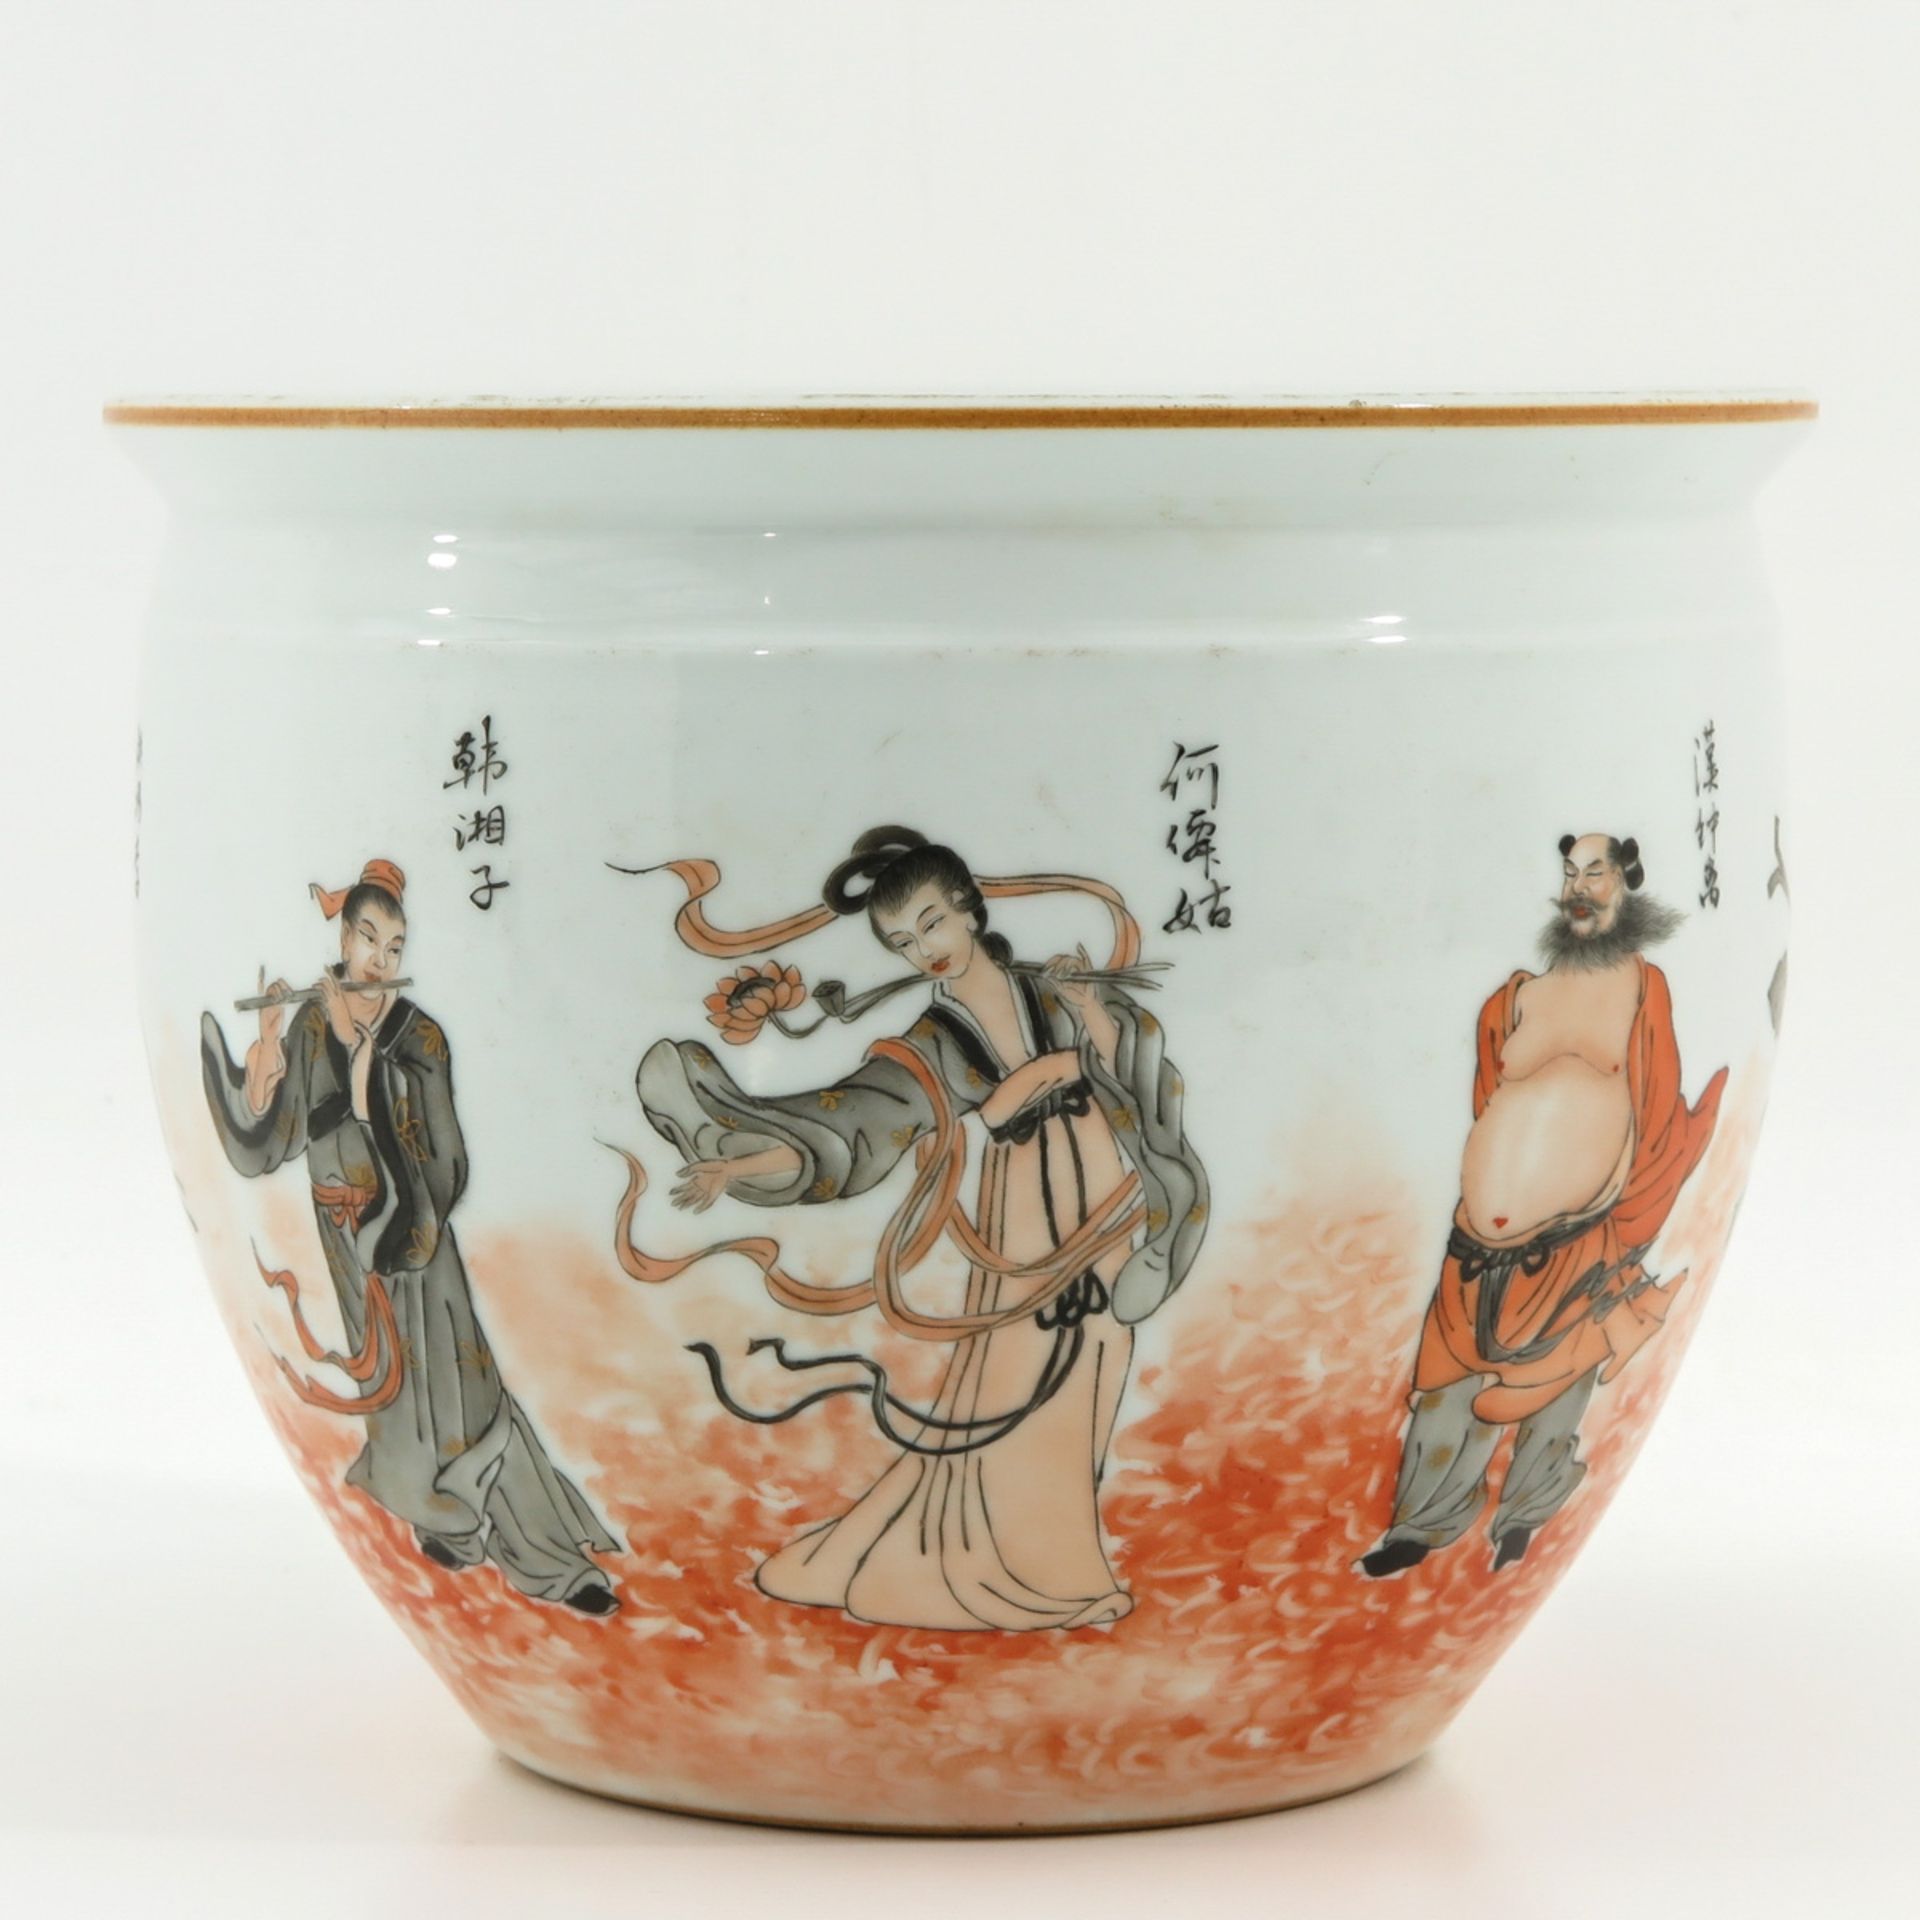 A Polyhchrome Decor Fish Bowl - Image 3 of 10